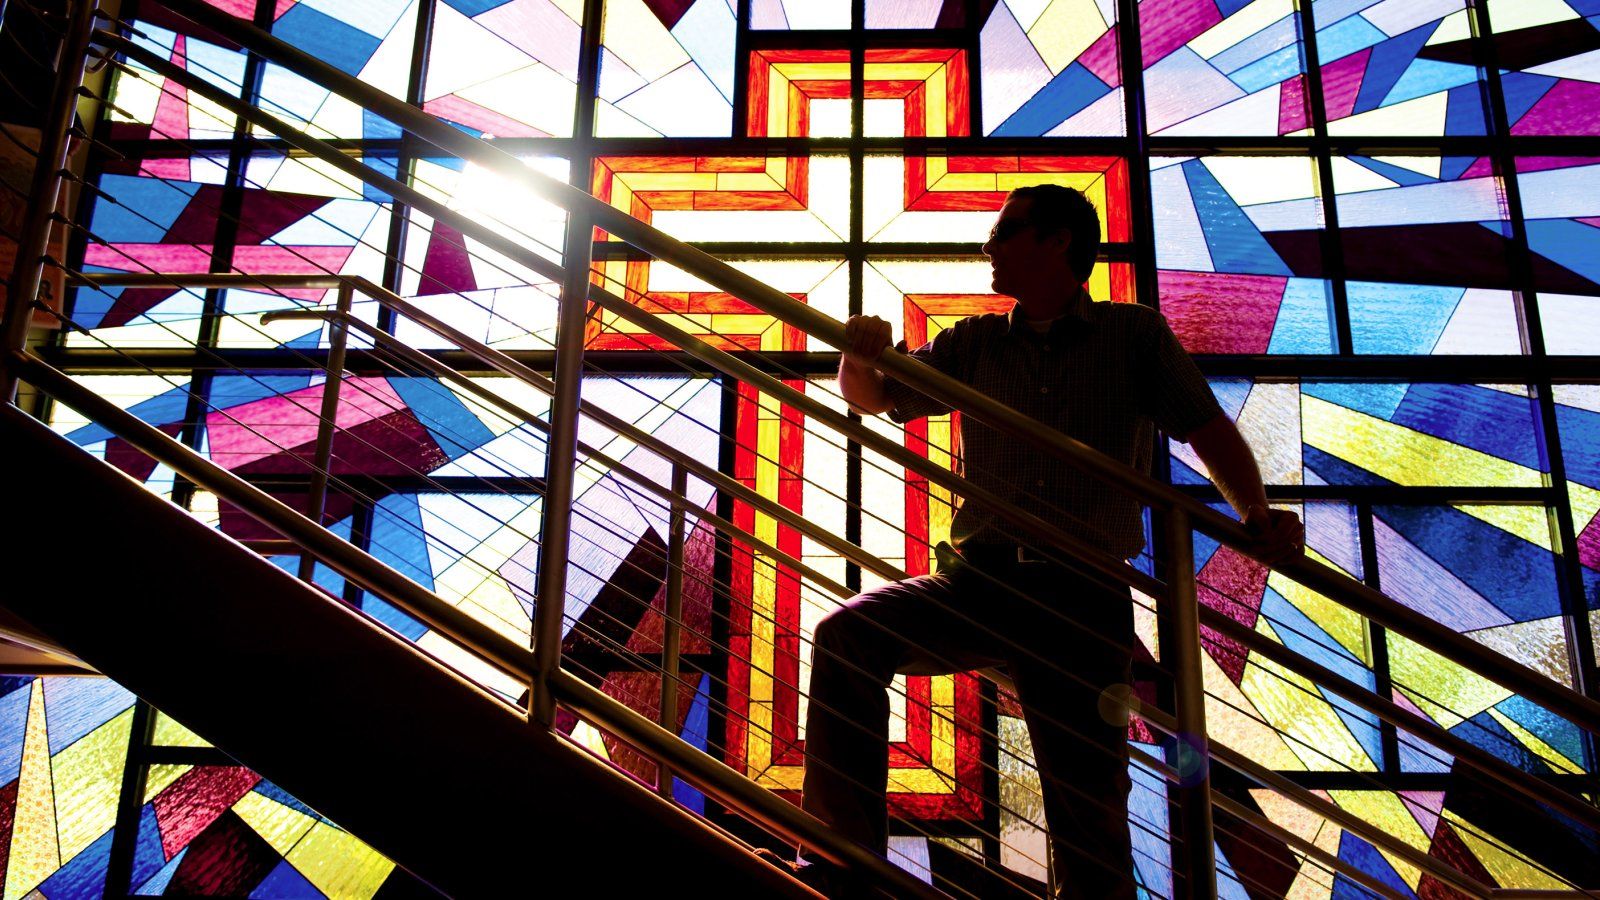 Man climbs staircase in shadow, backlit by sun coming through giant stained glass window of a cross